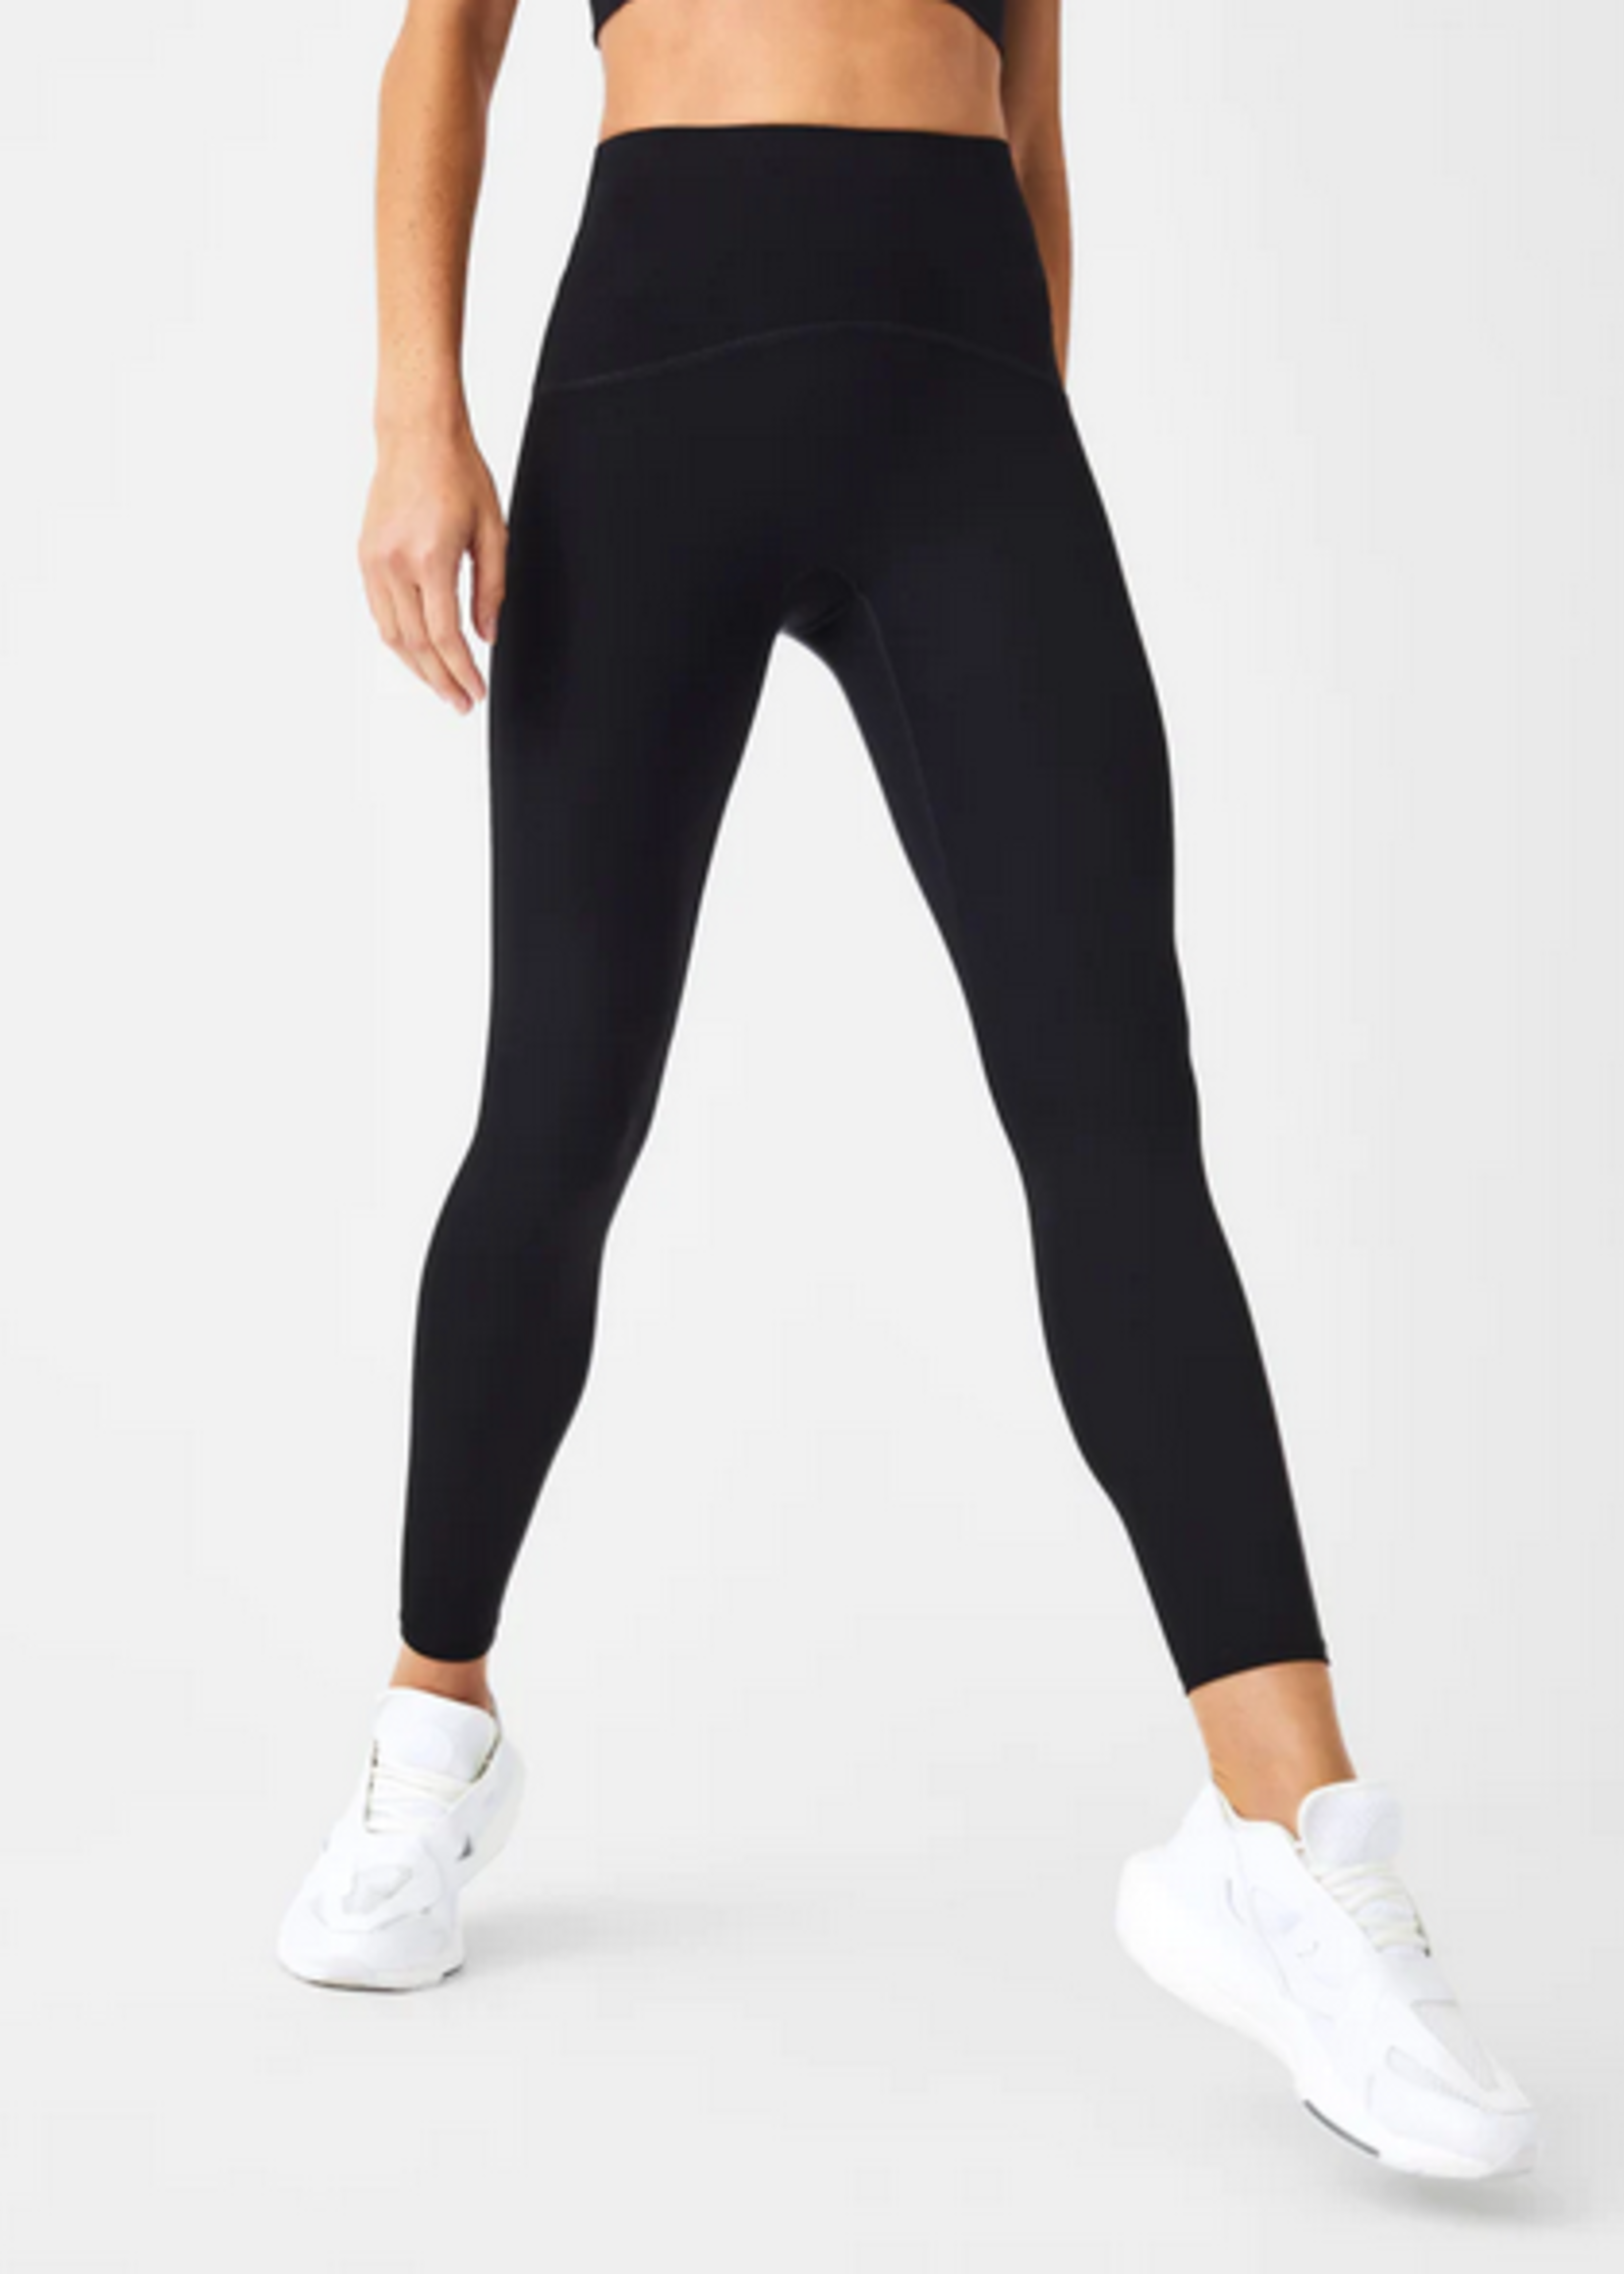 SPANX BOOTY BOOST ACTIVE 7/8 LEGGINGS